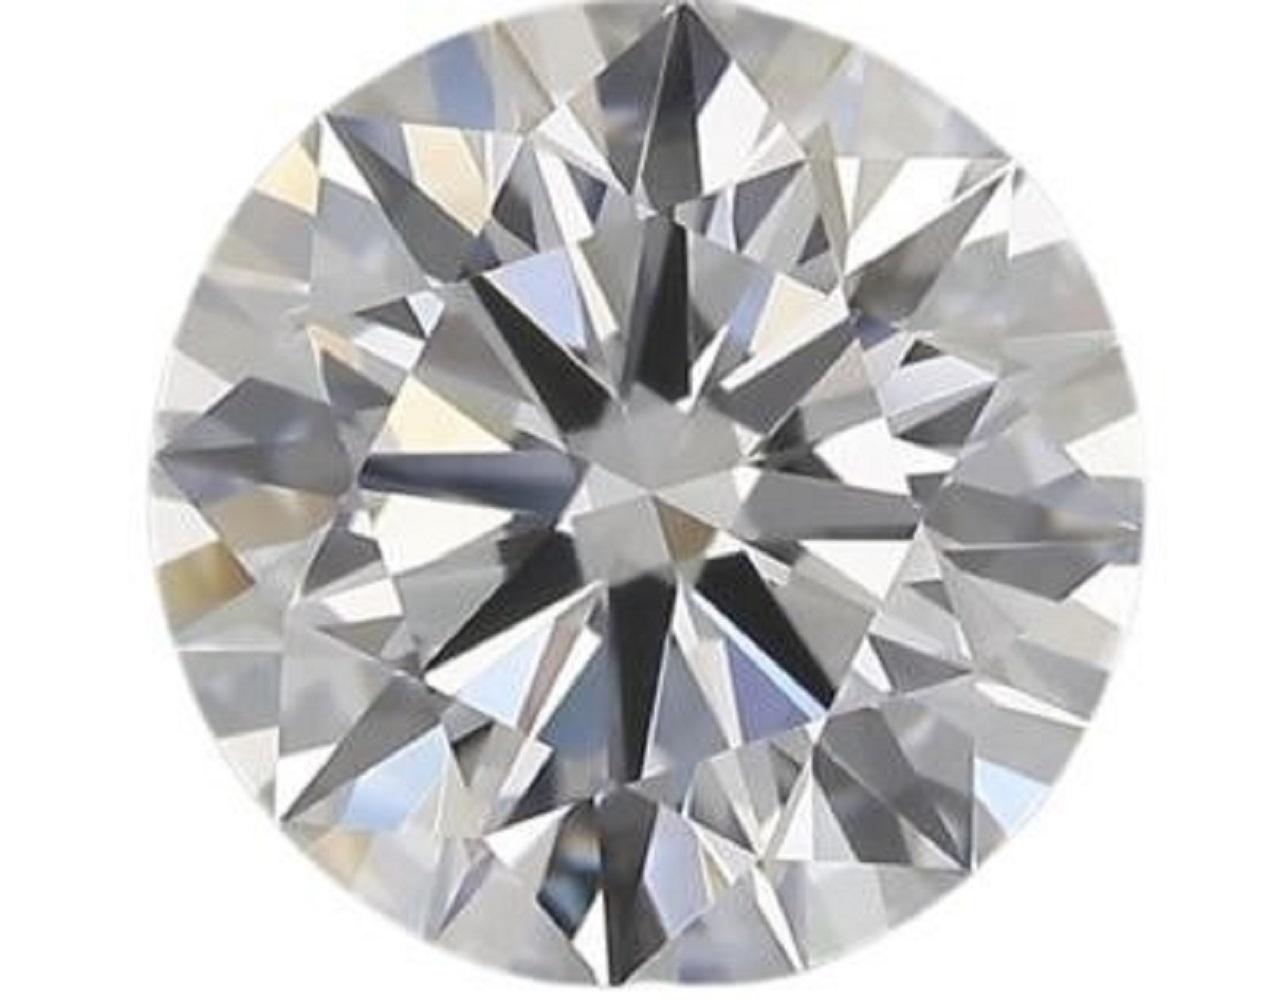 1 sparkling flawless natural round brilliant cut diamond in a 0.71 carat D IF with excellent cut. This diamond has the highest possible color and clarity grading. This diamond comes with IGI Certificate and laser inscription number.

SKU: